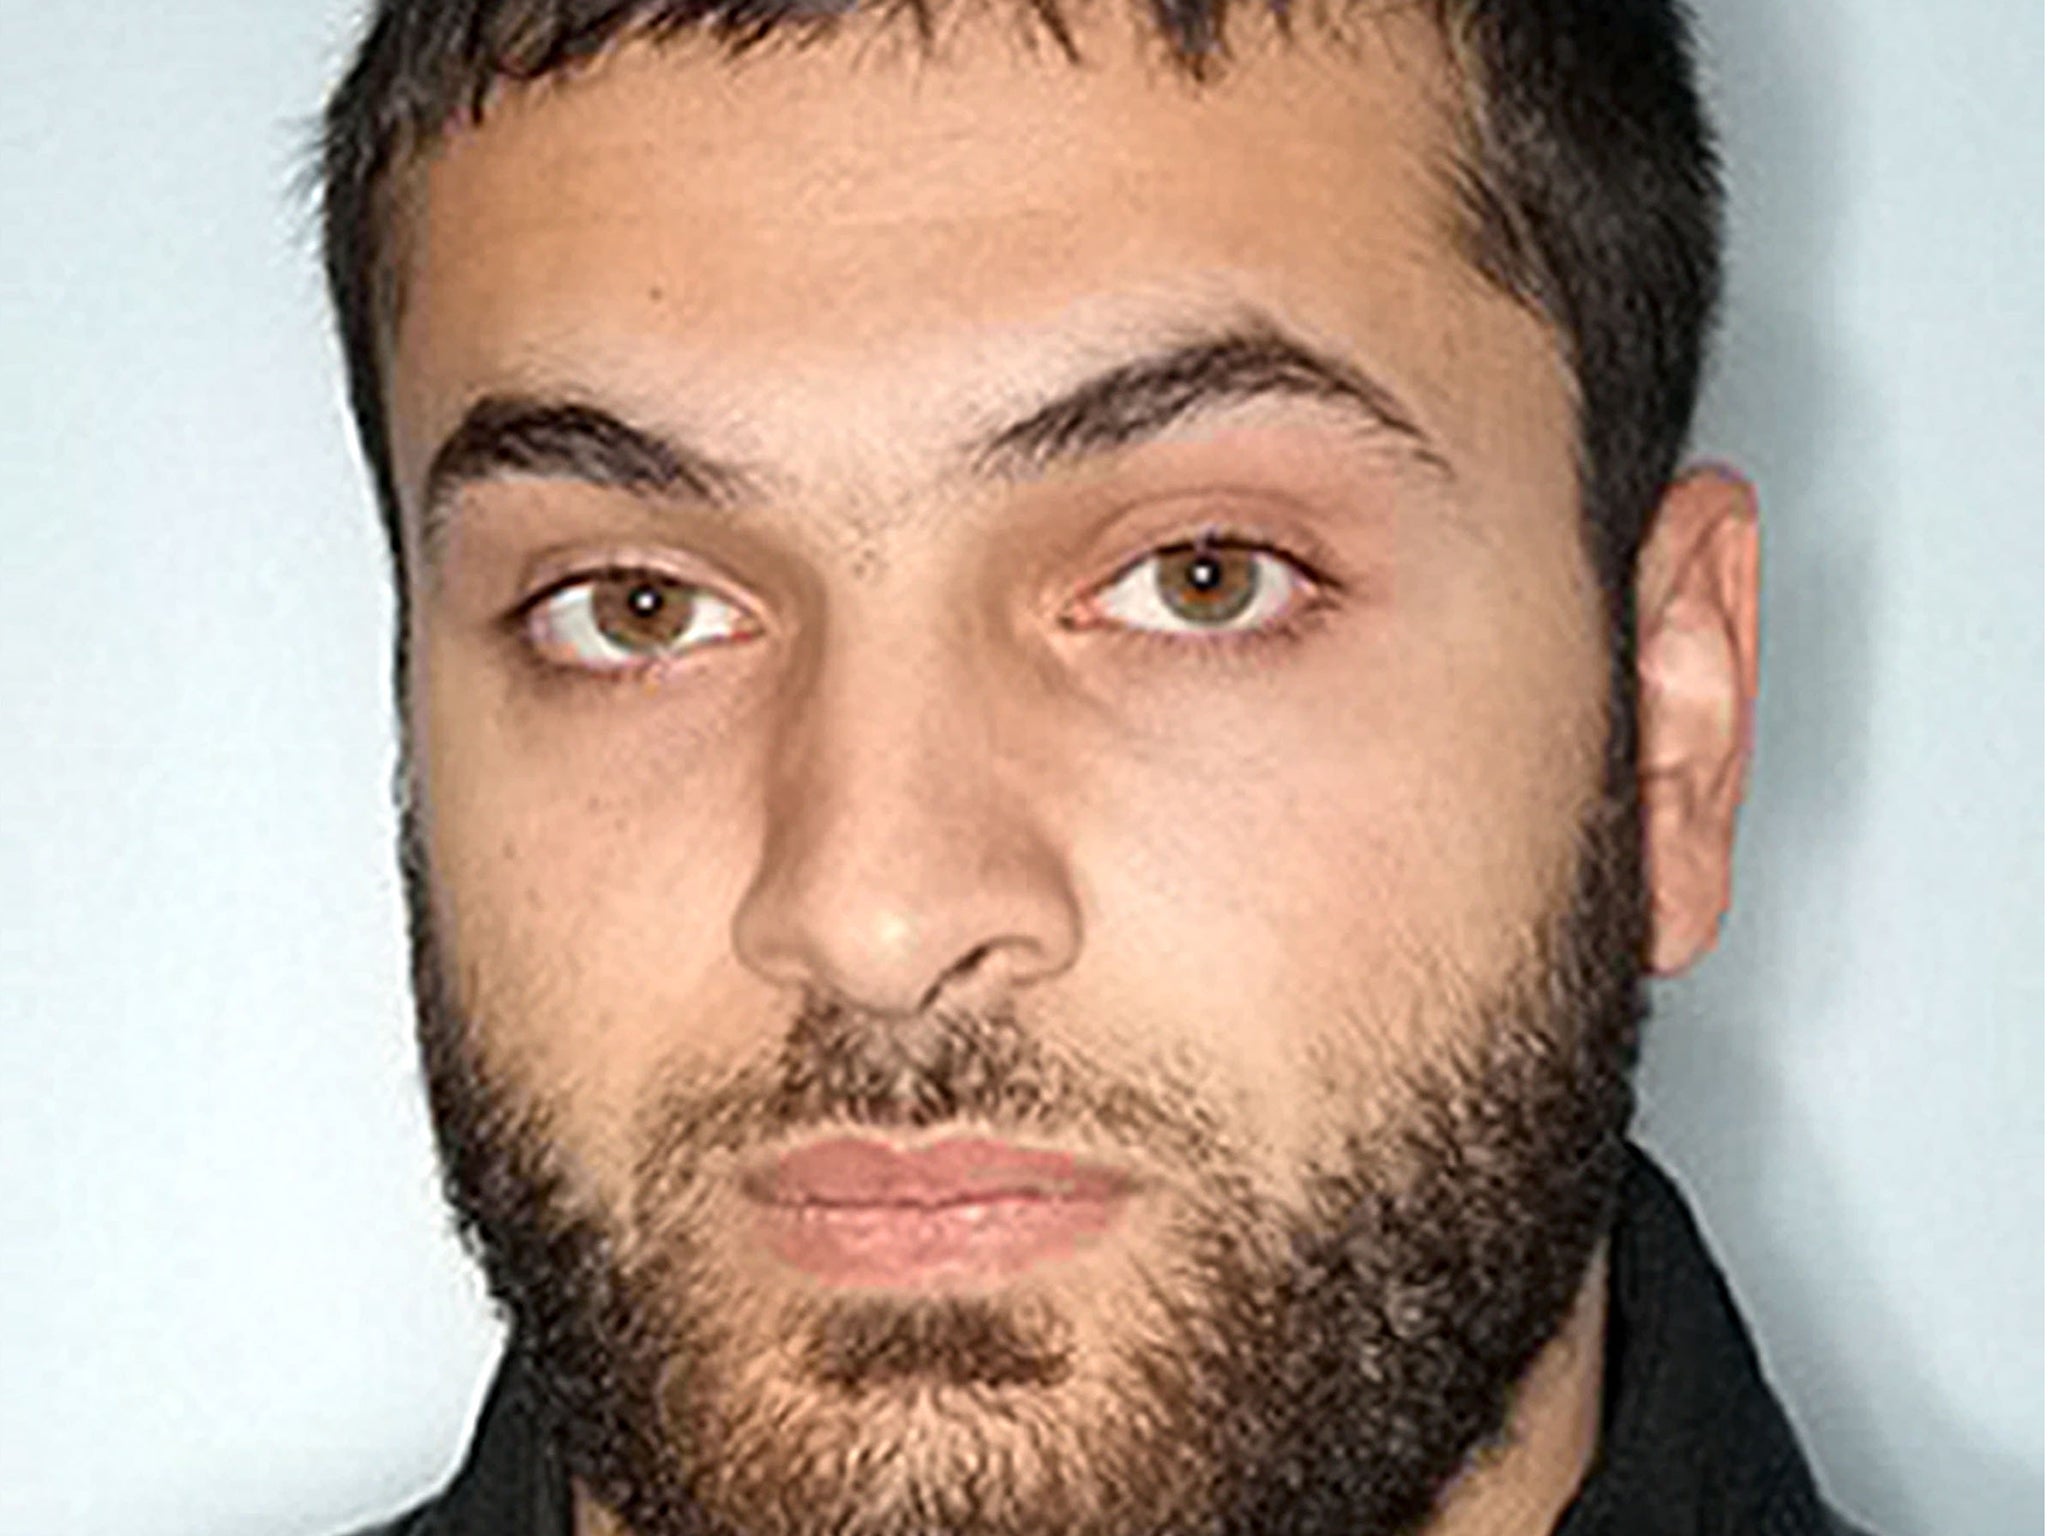 Law student Erol Incedal, 27, who was jailed for 42 months today at the Old Bailey for possessing a bomb making manual on a memory card taped to his iPhone case.